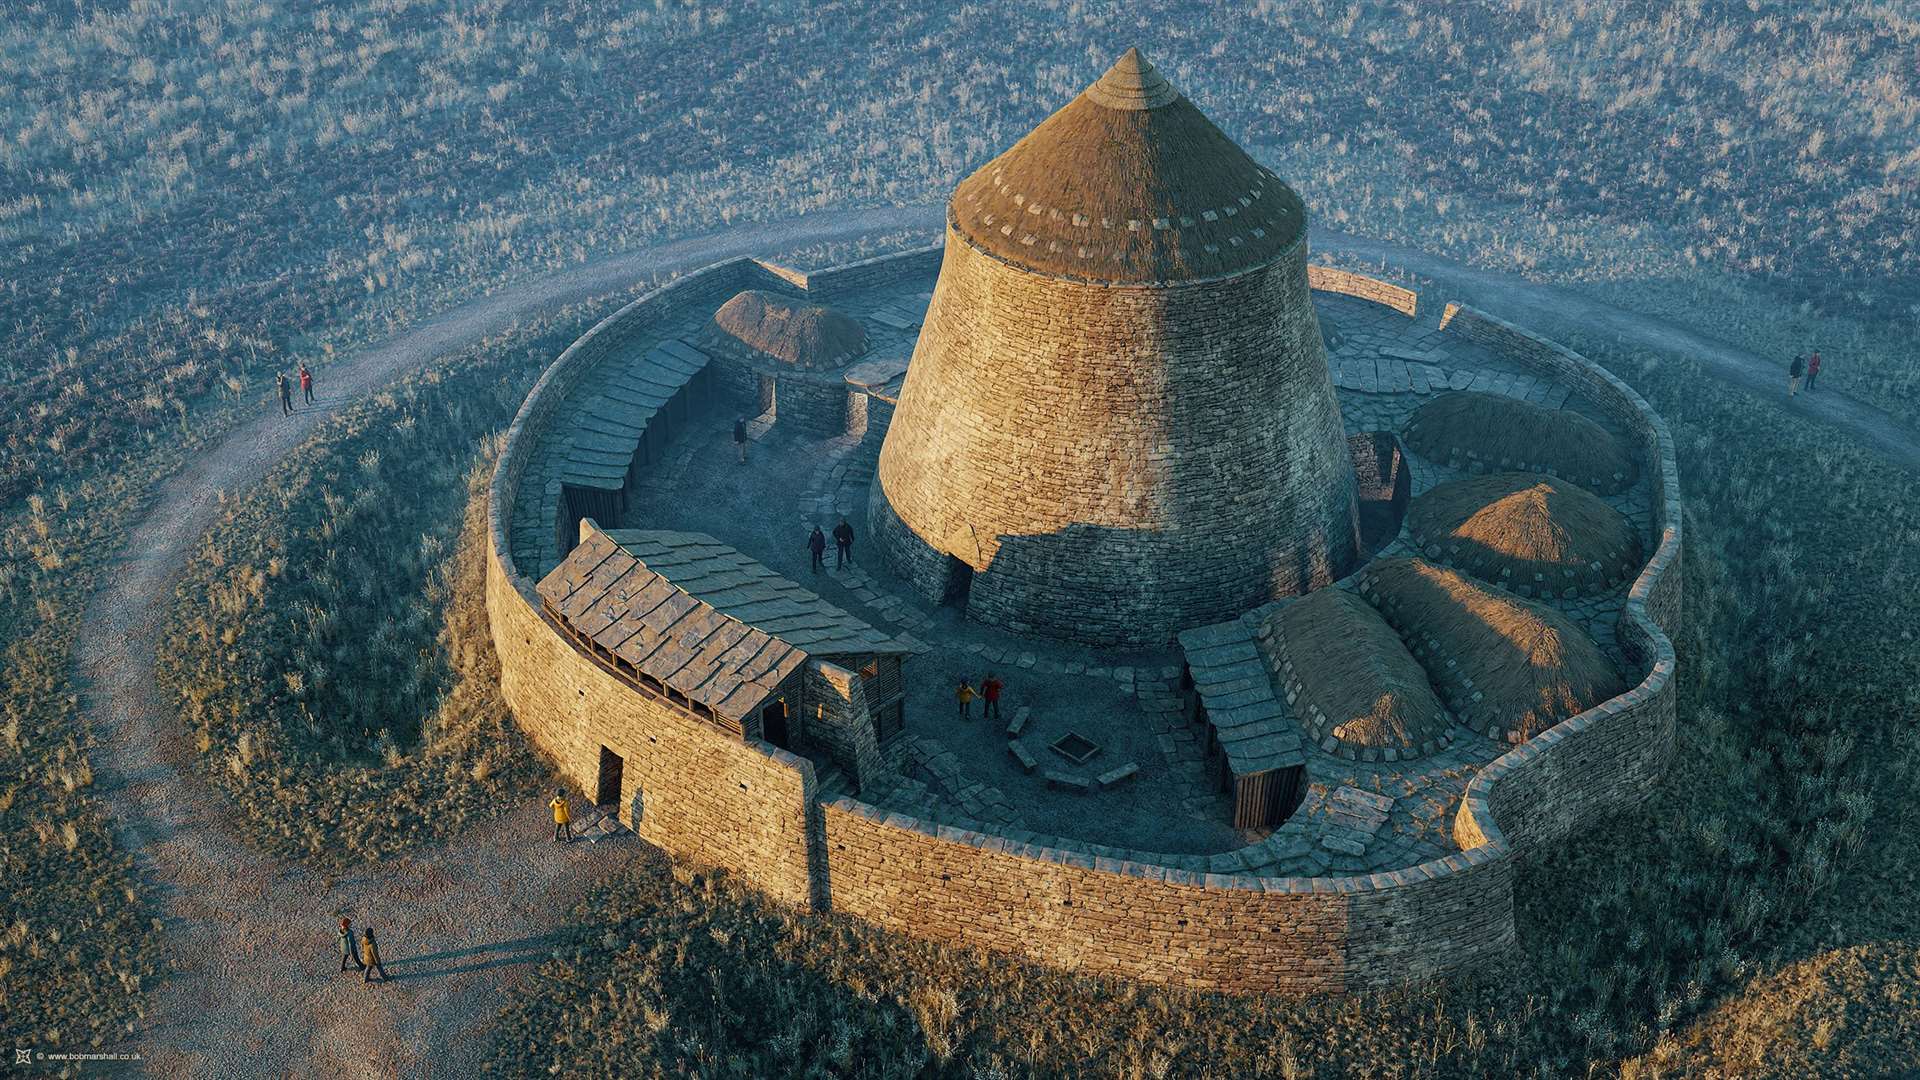 This is a broch. A digital reconstruction of the prehistoric tower